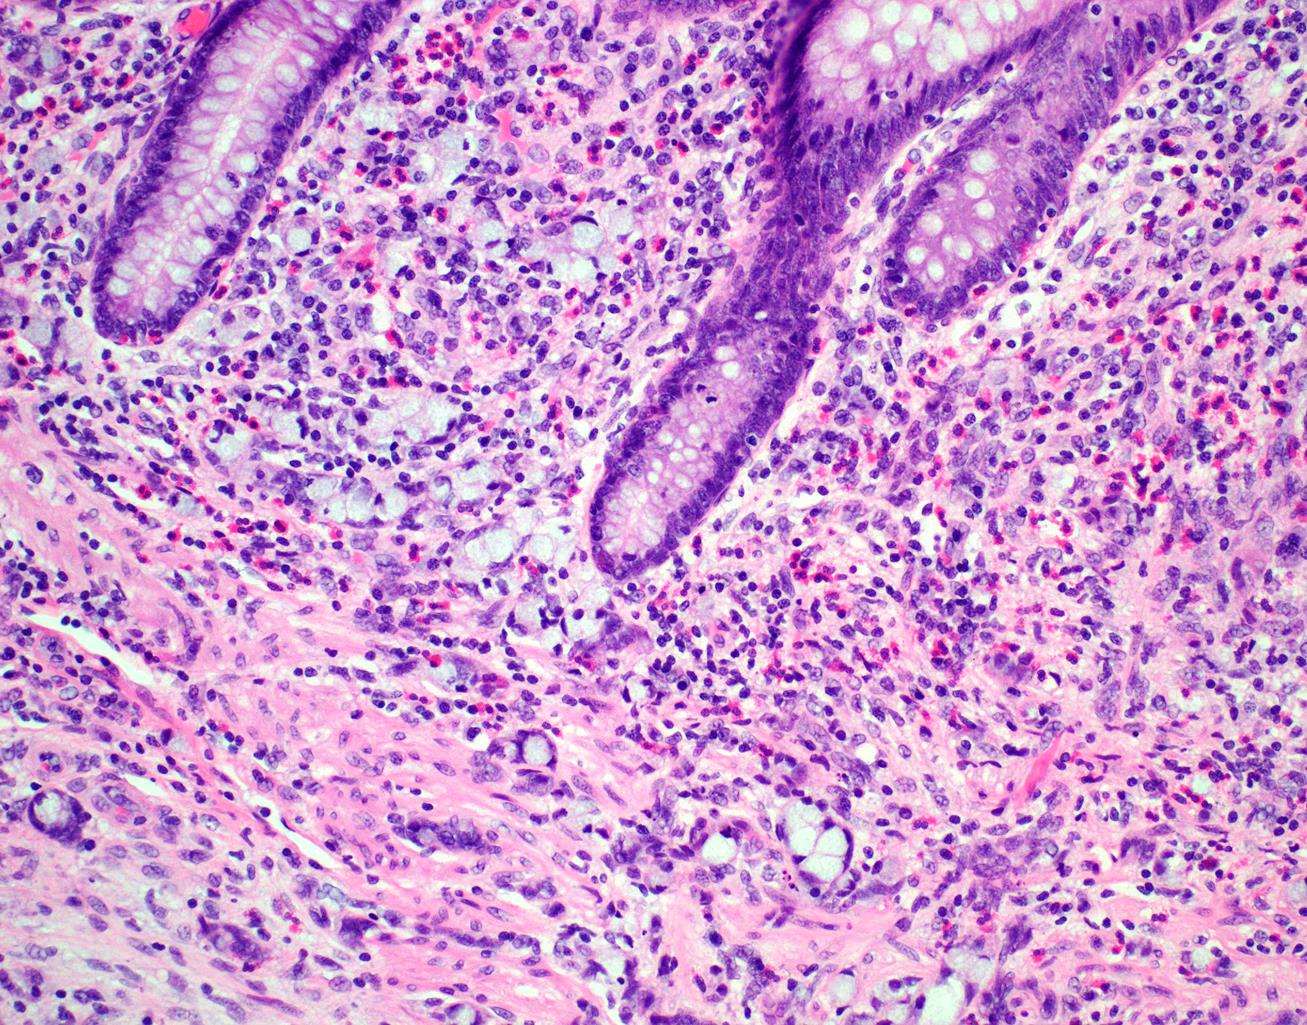 Tumor clusters and single signet-ring-like cells are present around the base of crypts.